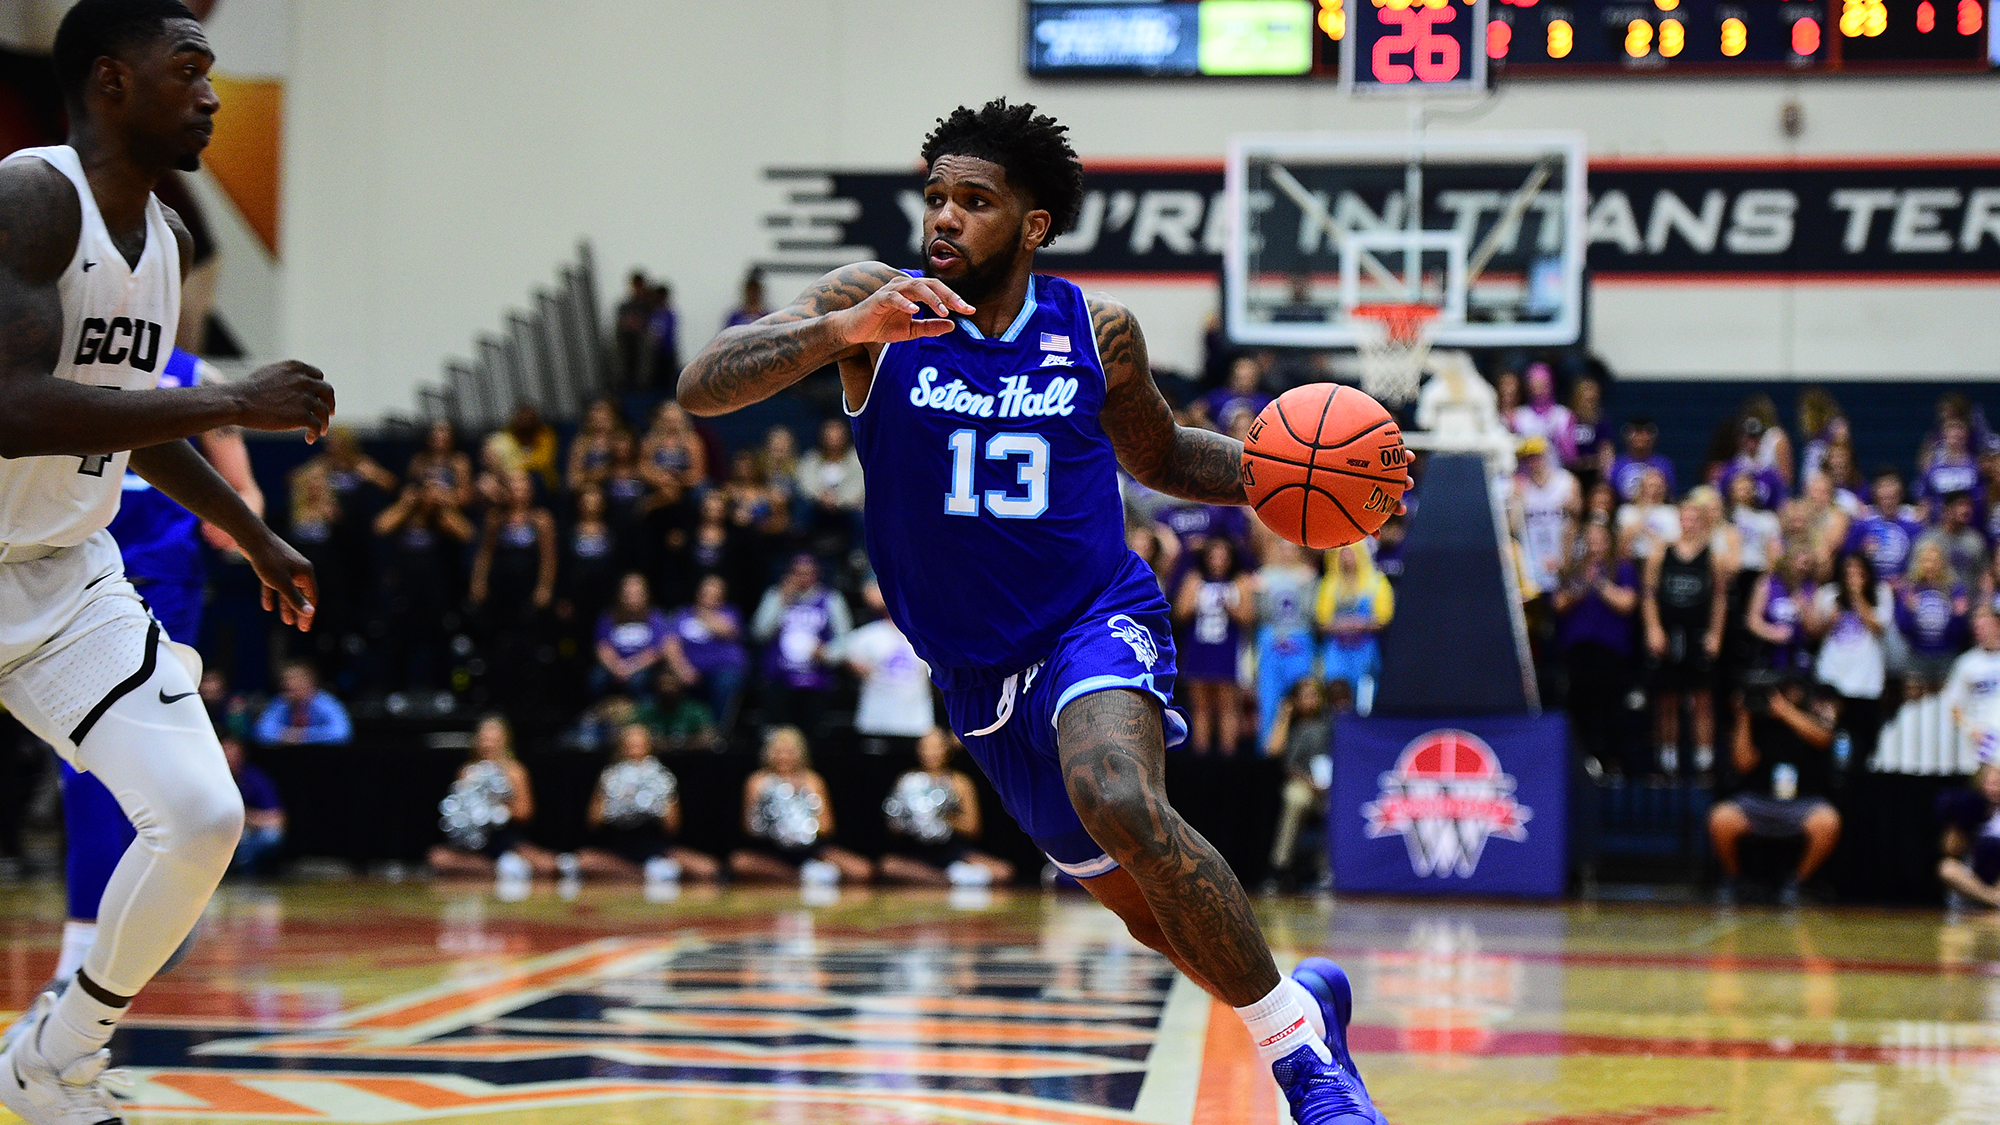 Seton Hall has a player with a 'big' NBA future (and it's not